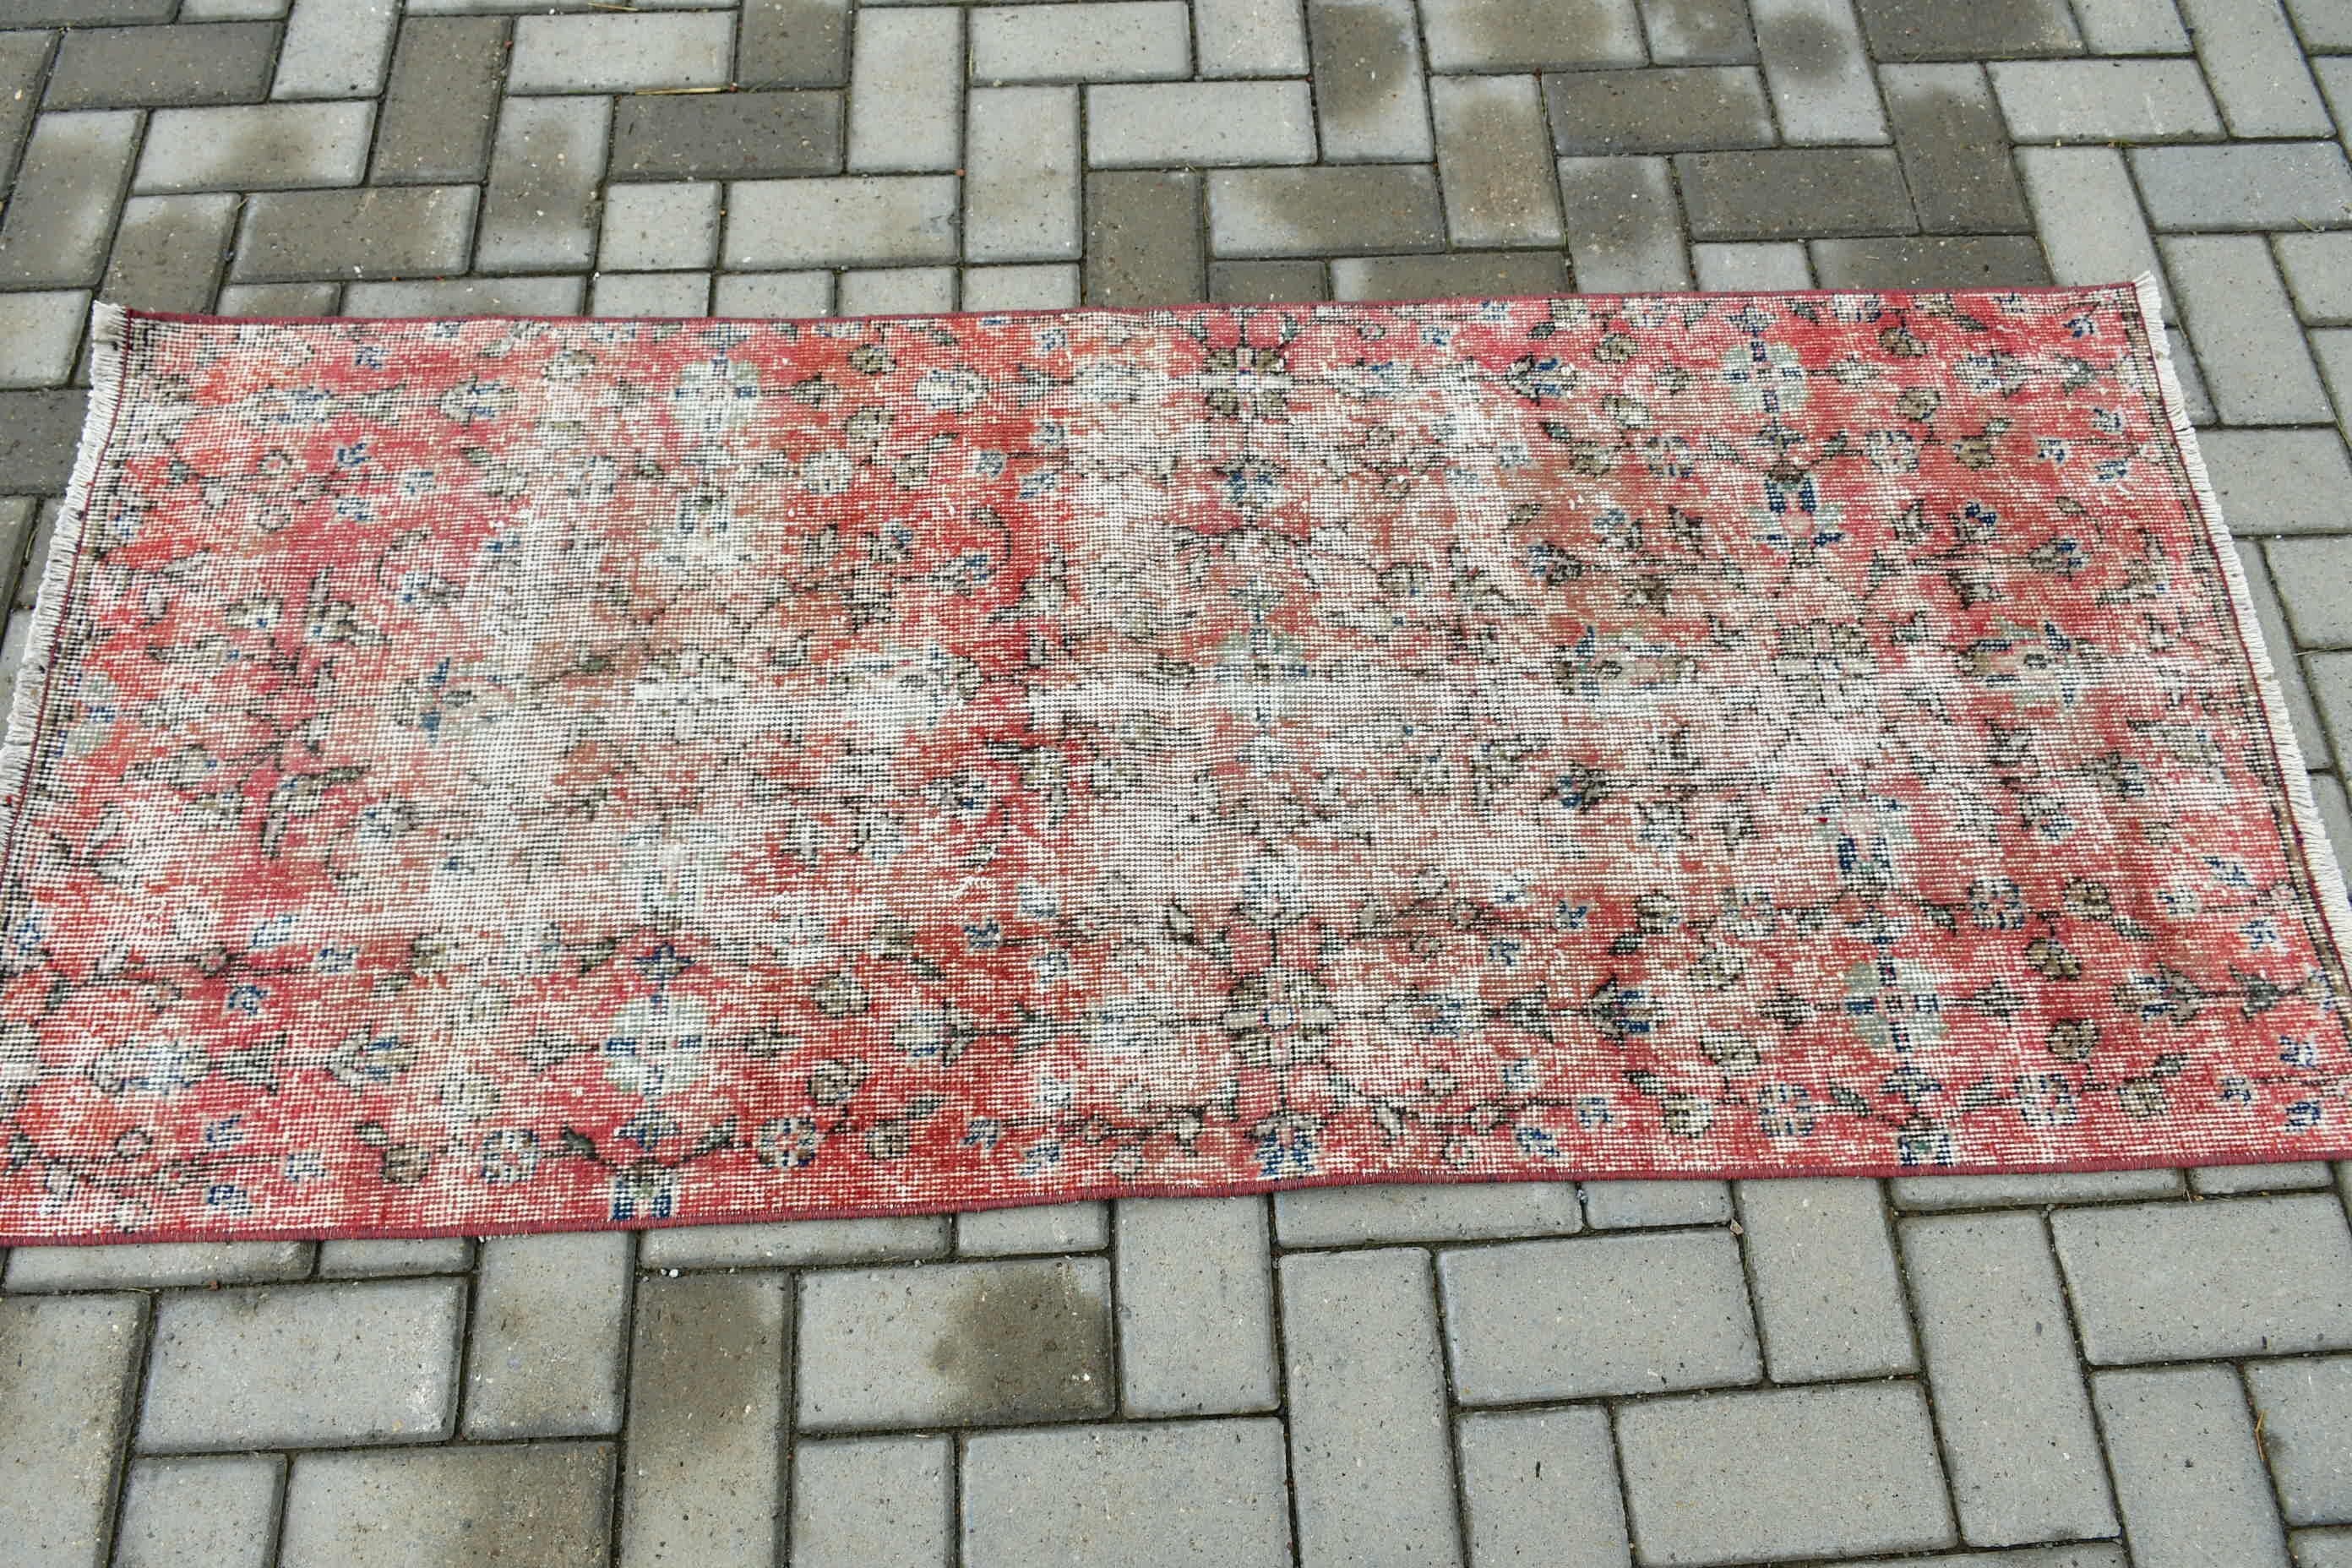 Wool Rug, Rugs for Wall Hanging, Vintage Rug, Red Cool Rug, Turkish Rug, 2.4x5.3 ft Small Rug, Home Decor Rug, Entry Rugs, Door Mat Rug